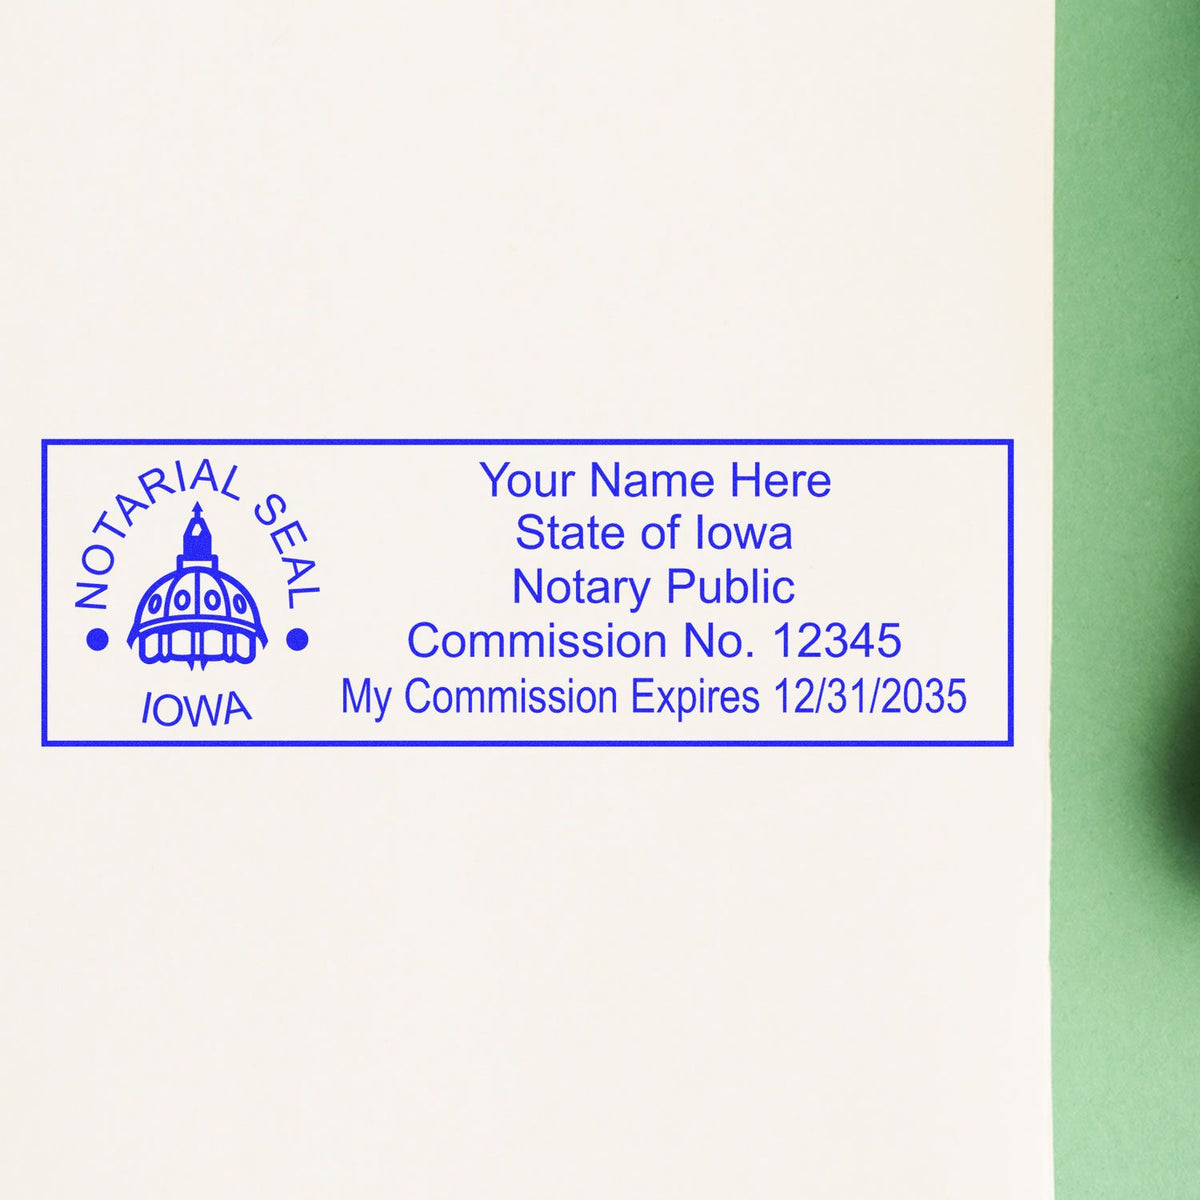 A photograph of the Heavy-Duty Iowa Rectangular Notary Stamp stamp impression reveals a vivid, professional image of the on paper.